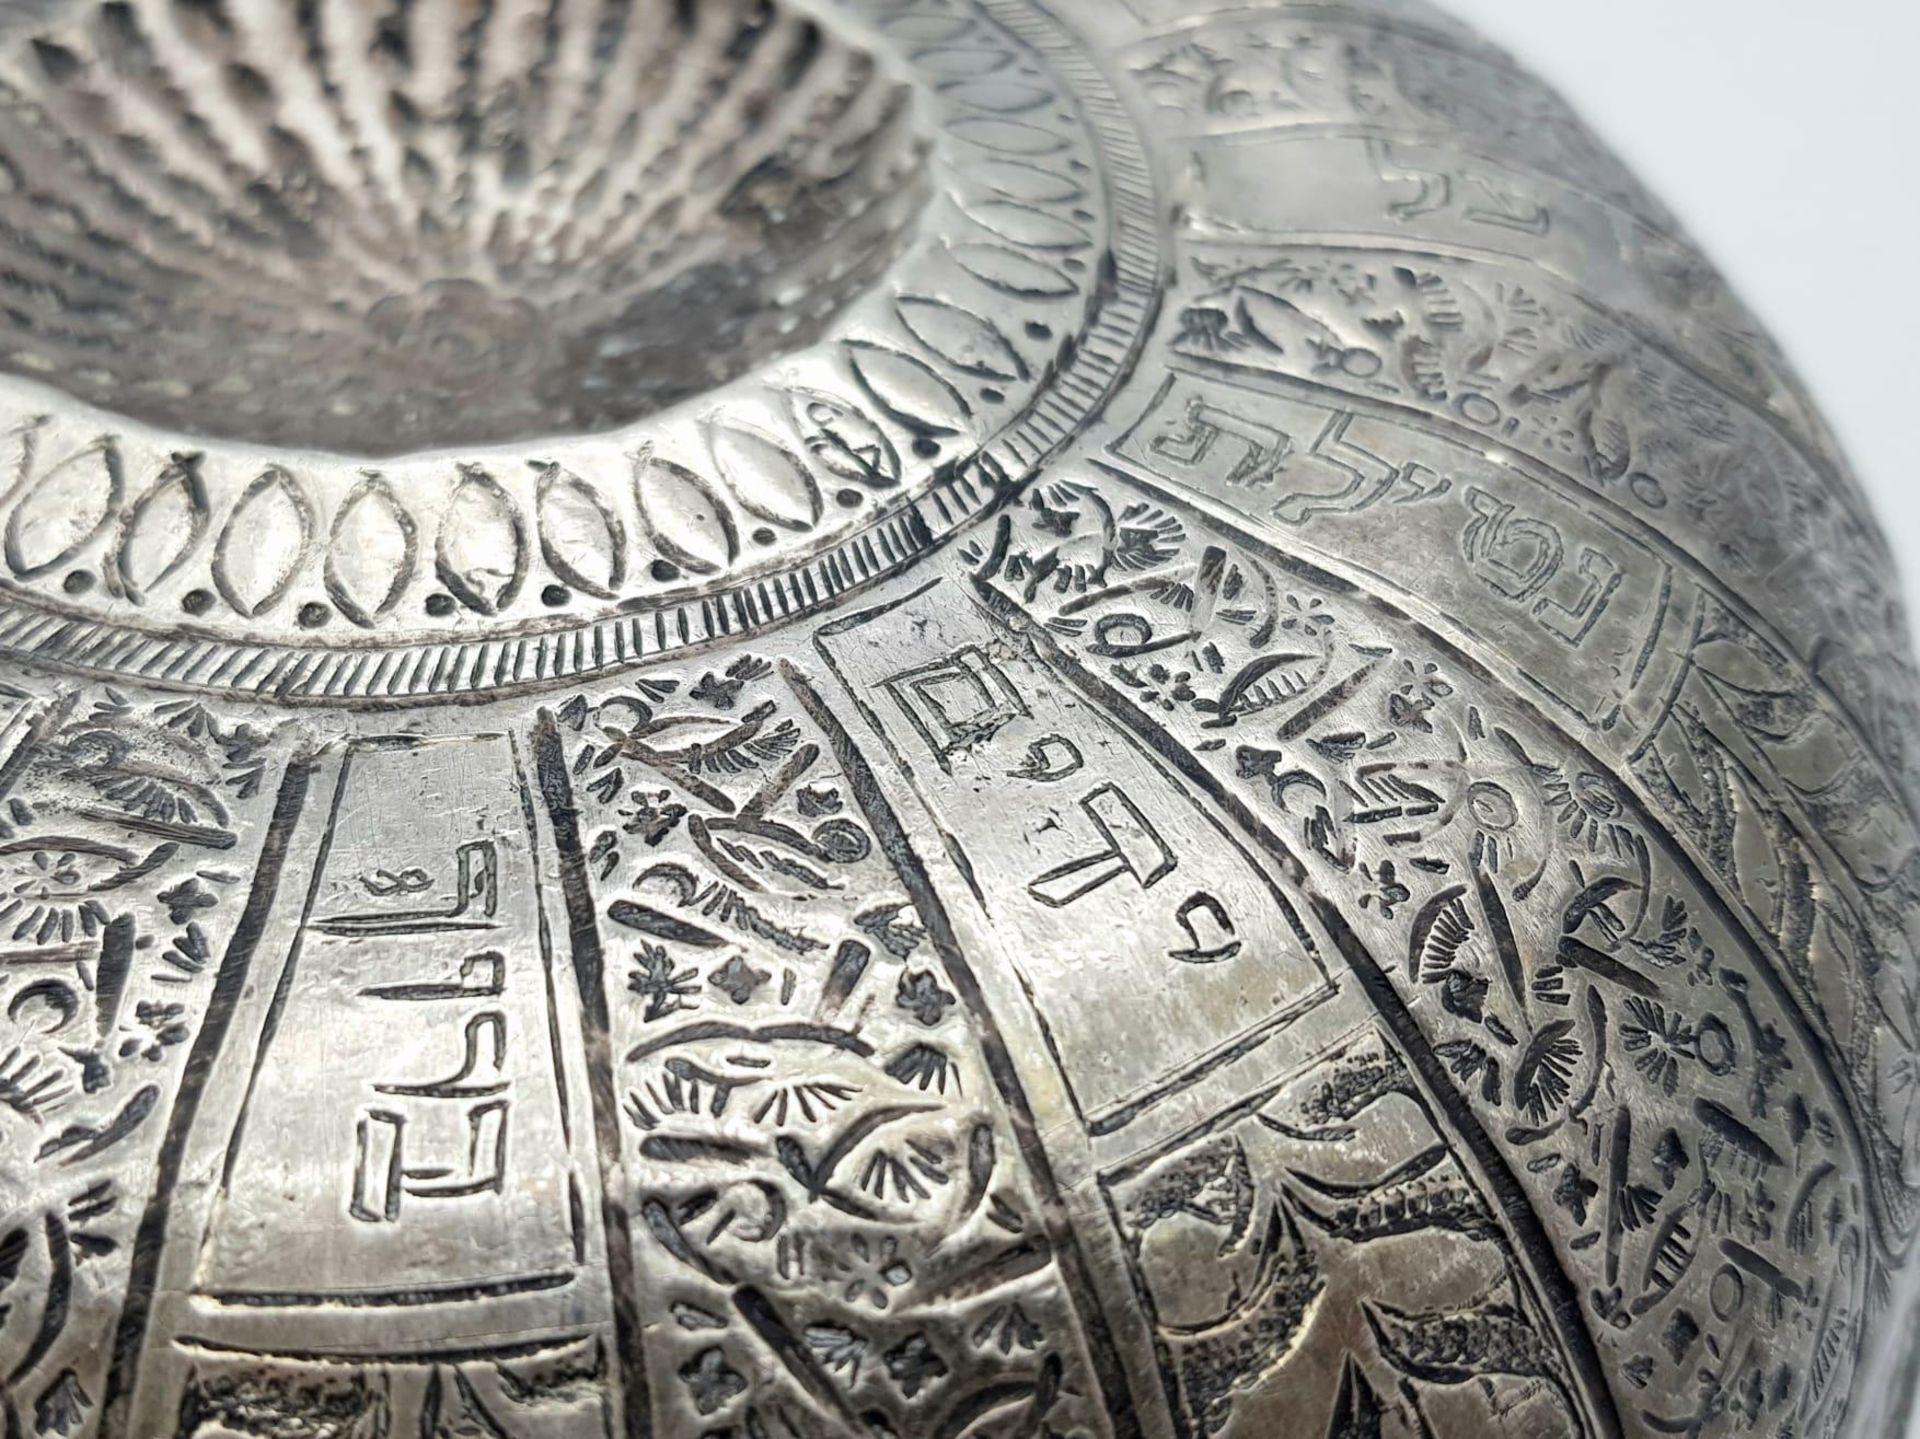 AN ANTIQUE HAND CHASED SILVER "PESACH" WATER BOWL WITH ELABORATE DESIGNS AND WRITING IN HEBREW . - Bild 6 aus 7